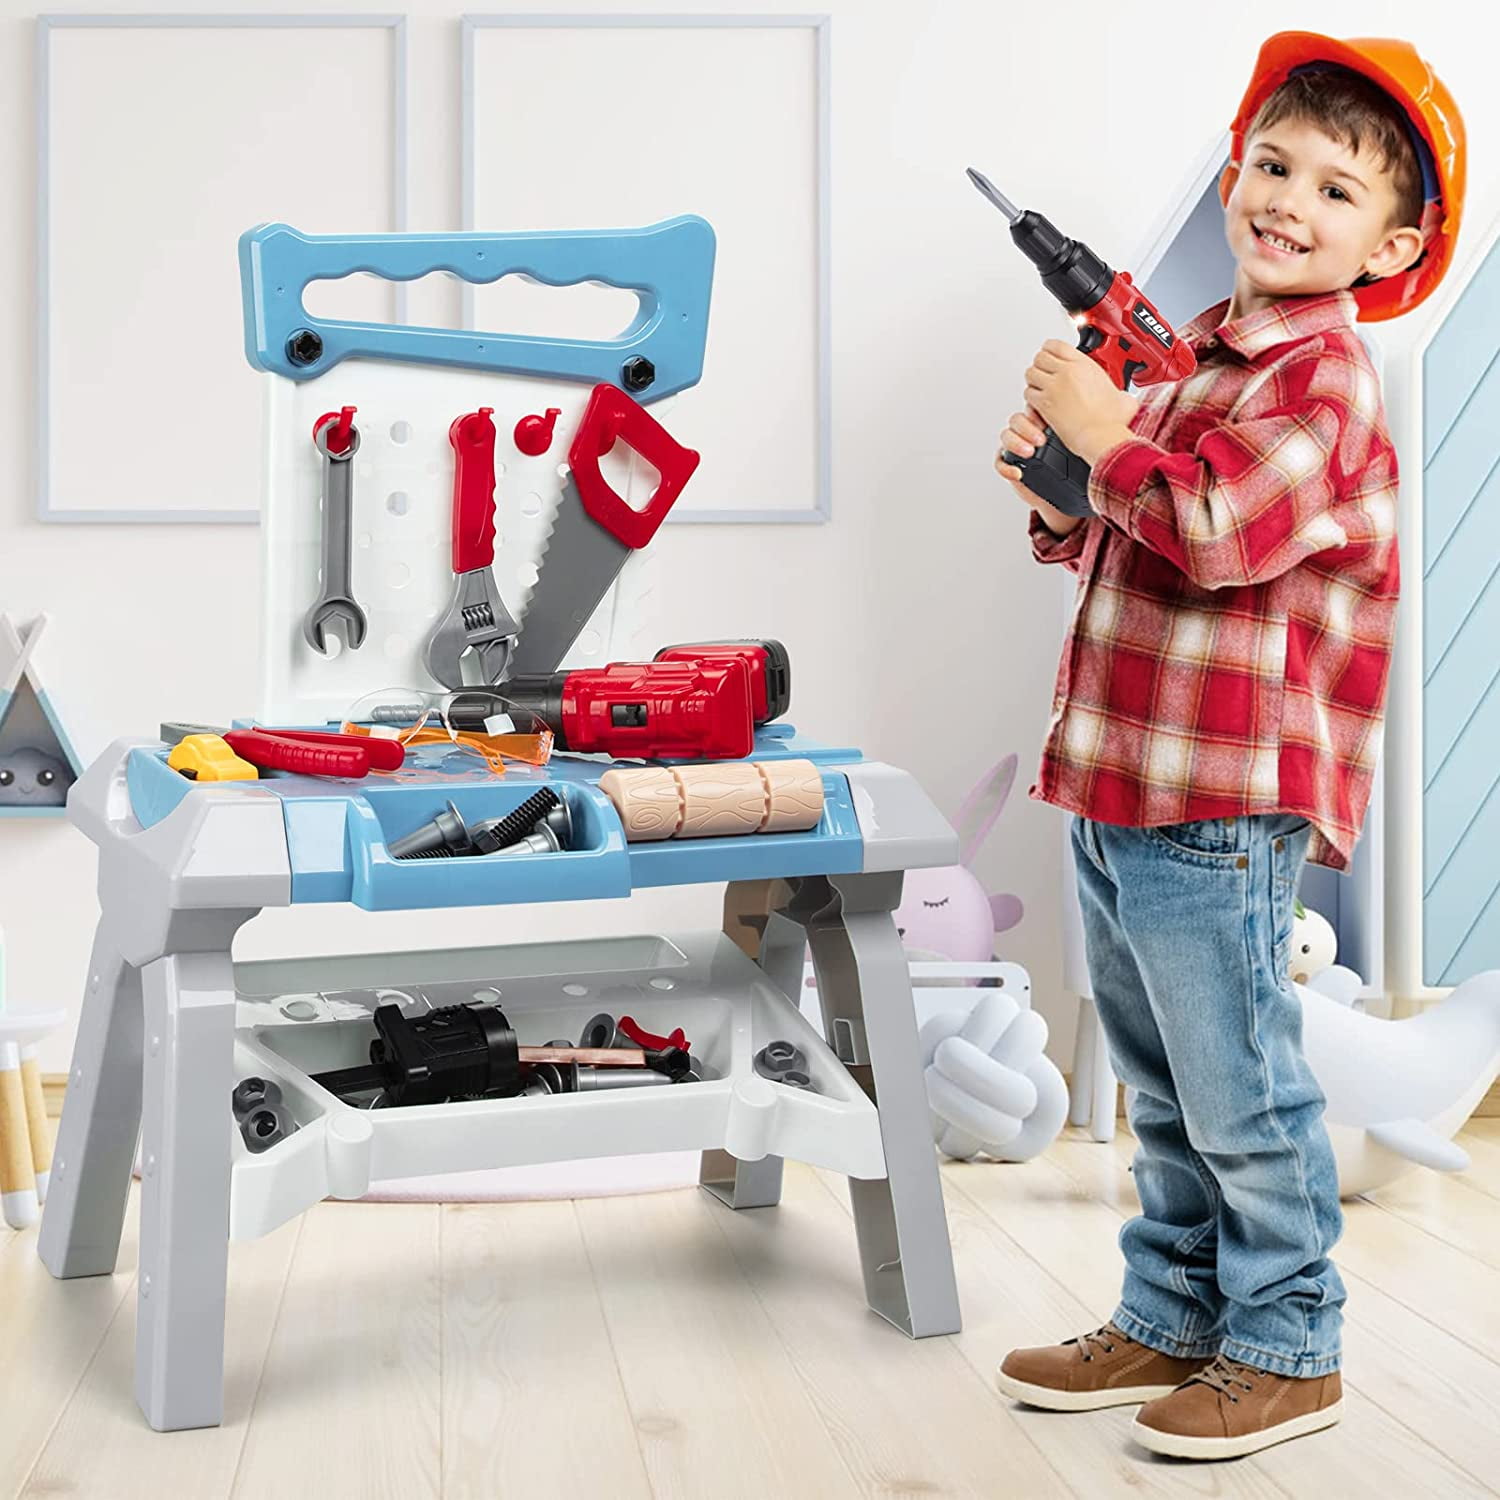  Magic4U Kids Tool Bench Set, 95PCS Toddler Tool Workbench with  Electronic Drill 13 Tool Equipements,Safety Vest & Hat,Pretend Play Kids  Construction Toys Gift for Boys Girls Age 3,4,5,6,7,8 : Toys 